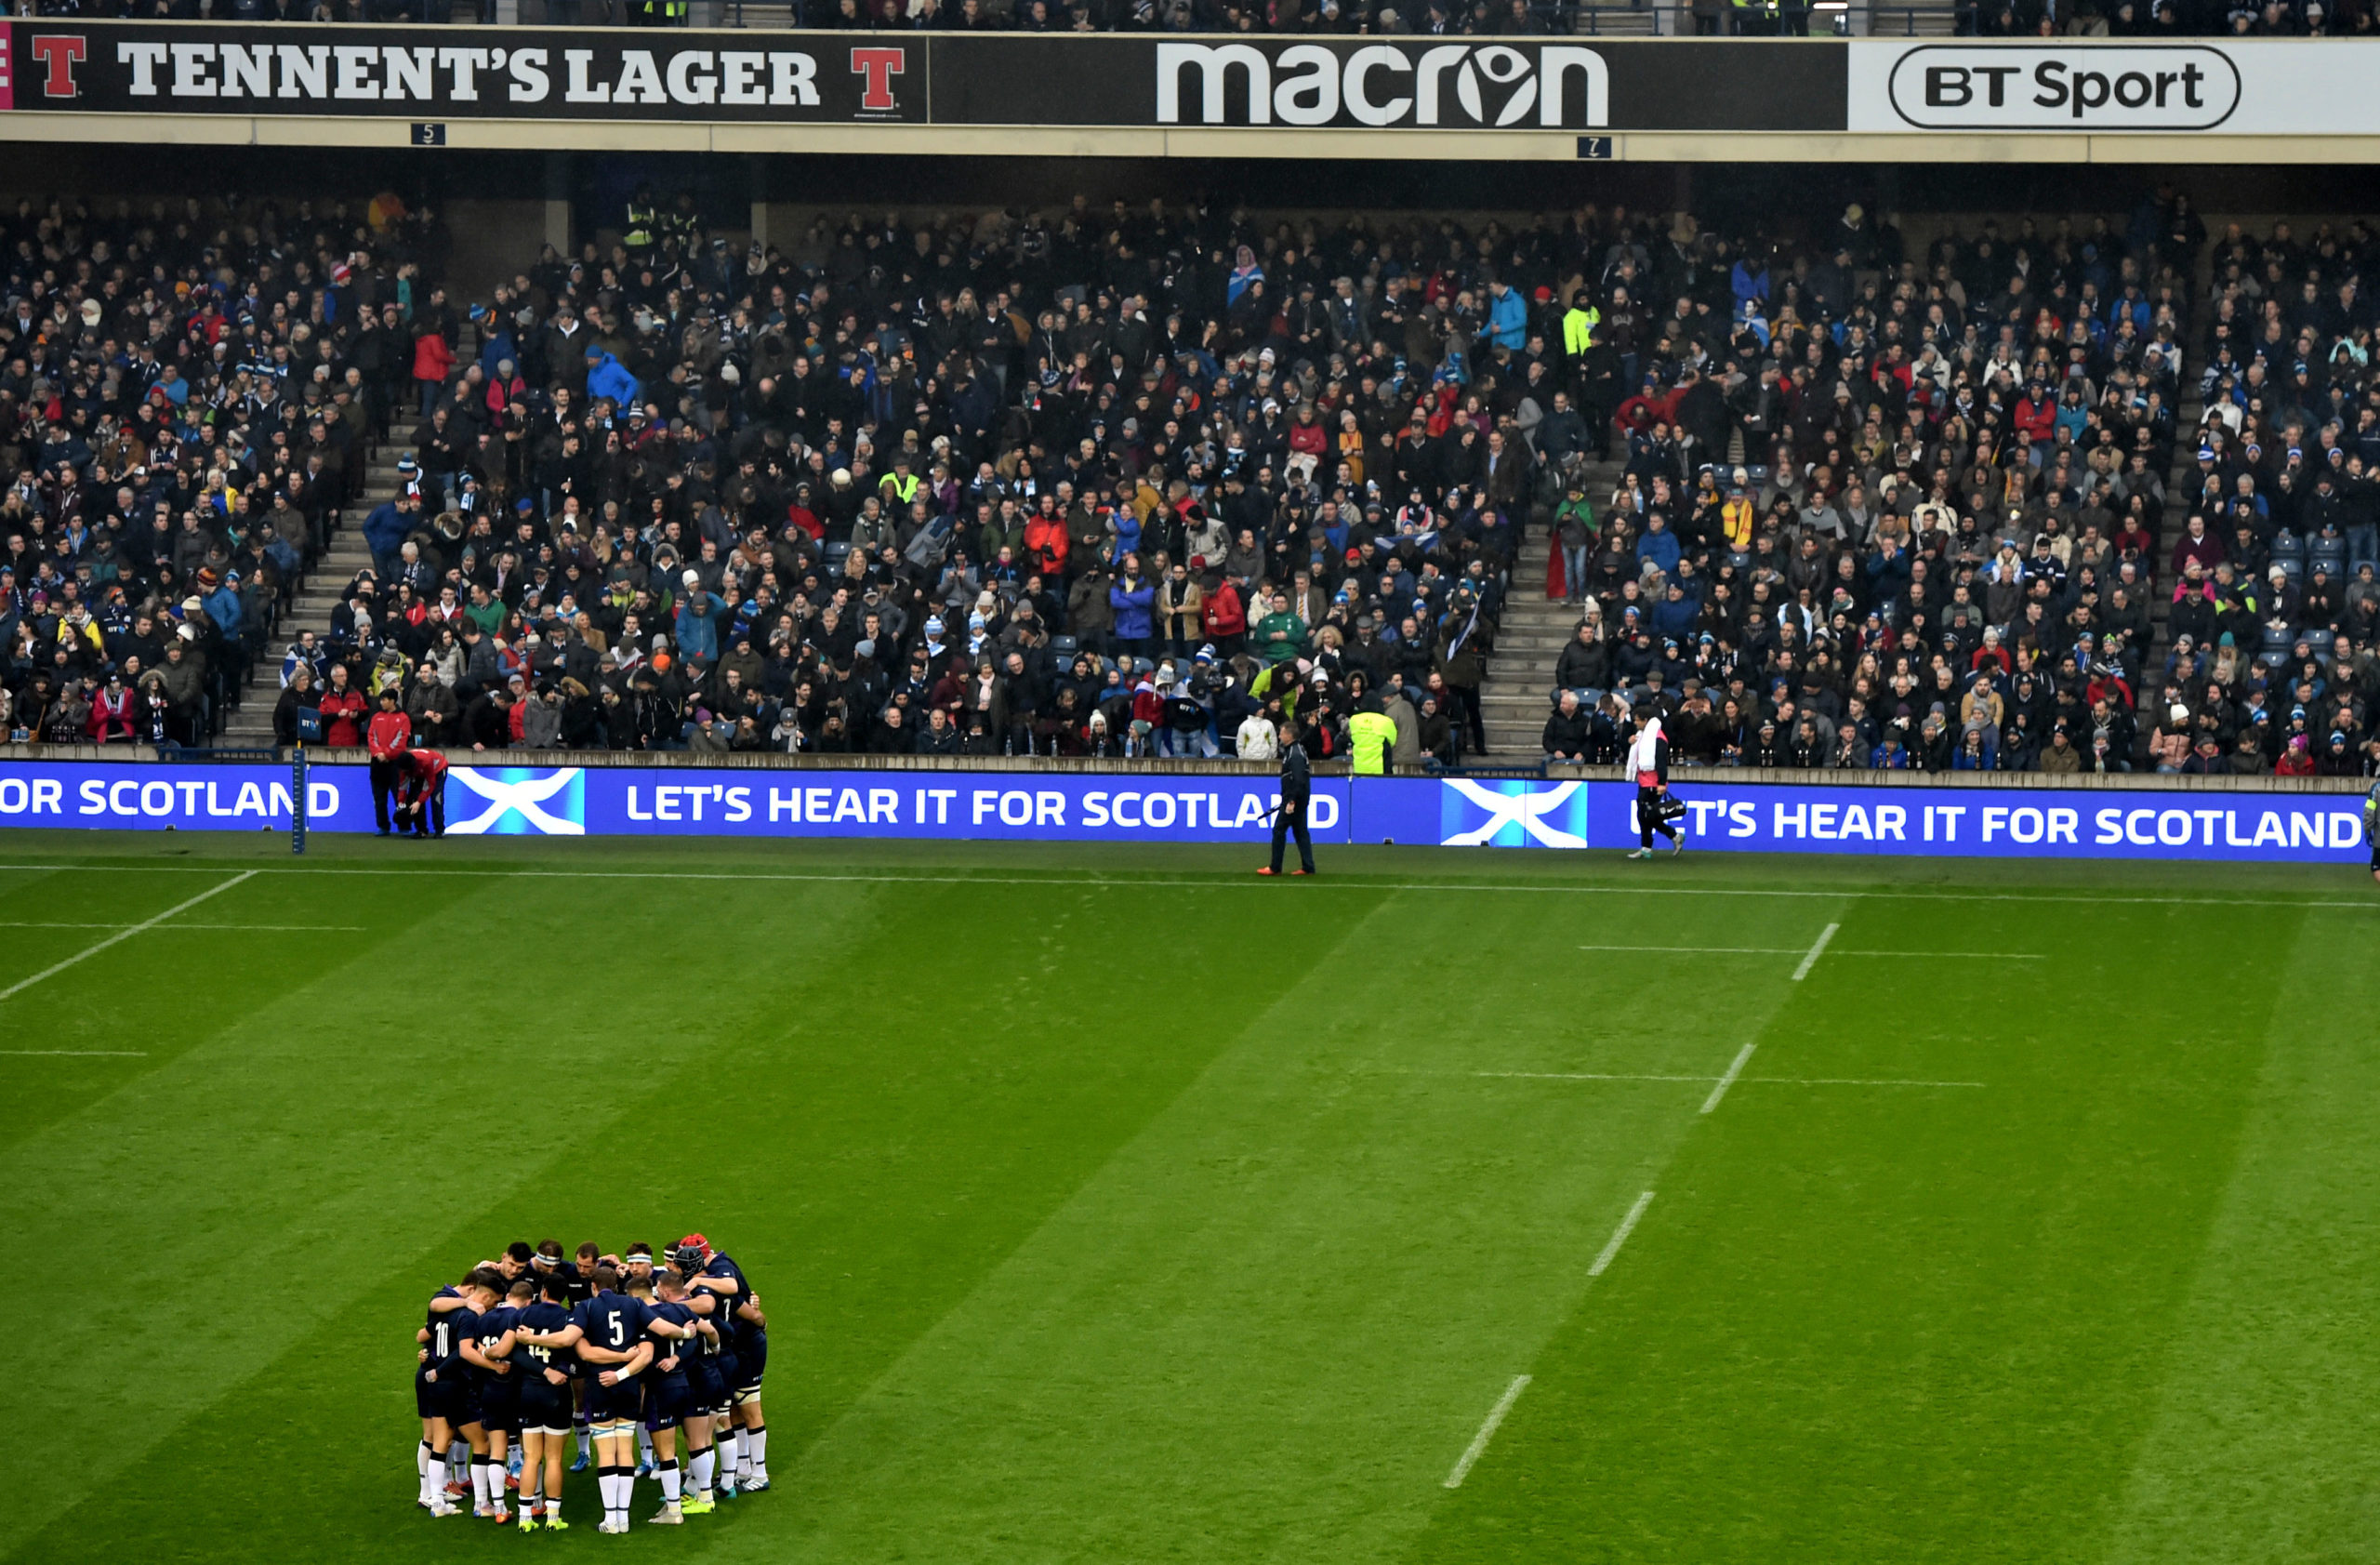 Scotland's rugby players have full counselling support while isolated during the lockdown.